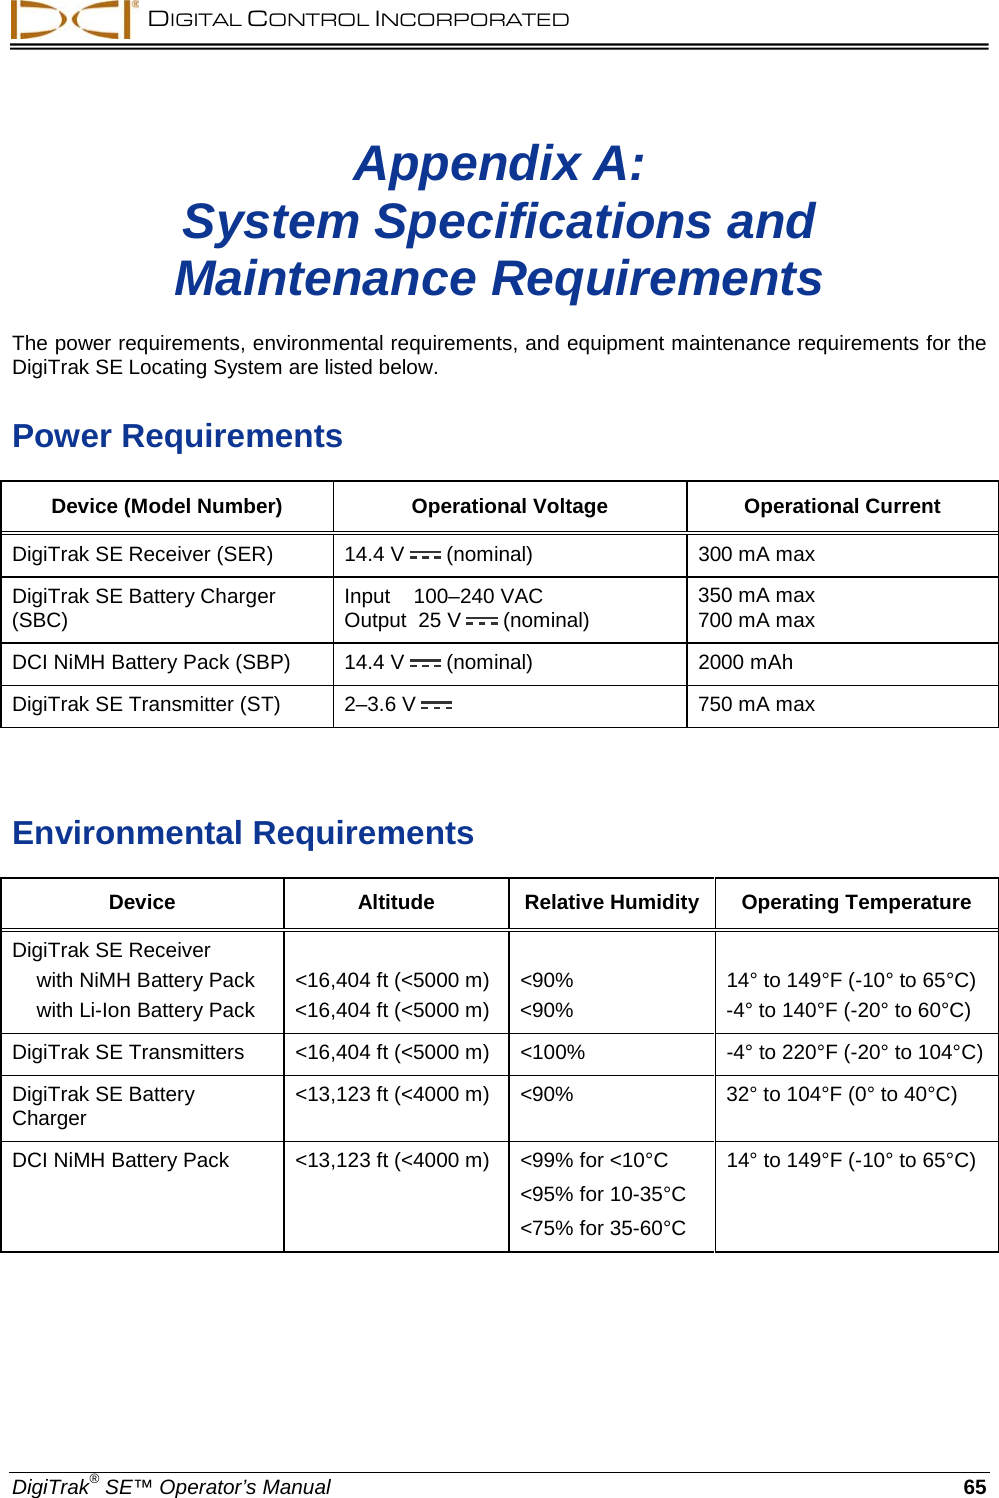  DIGITAL CONTROL INCORPORATED  DigiTrak® SE™ Operator’s Manual 65 Appendix A: System Specifications and Maintenance Requirements  The power requirements, environmental requirements, and equipment maintenance requirements for the DigiTrak SE Locating System are listed below. Power Requirements Device (Model Number) Operational Voltage Operational Current DigiTrak SE Receiver (SER) 14.4 V  (nominal)  300 mA max DigiTrak SE Battery Charger (SBC)  Input    100–240 VAC Output  25 V  (nominal)  350 mA max 700 mA max  DCI NiMH Battery Pack (SBP) 14.4 V  (nominal) 2000 mAh  DigiTrak SE Transmitter (ST)  2–3.6 V  750 mA max   Environmental Requirements Device Altitude Relative Humidity Operating Temperature DigiTrak SE Receiver              with NiMH Battery Pack &lt;16,404 ft (&lt;5000 m) &lt;90% 14° to 149°F (-10° to 65°C)  with Li-Ion Battery Pack &lt;16,404 ft (&lt;5000 m) &lt;90%  -4° to 140°F (-20° to 60°C) DigiTrak SE Transmitters &lt;16,404 ft (&lt;5000 m) &lt;100%  -4° to 220°F (-20° to 104°C) DigiTrak SE Battery Charger &lt;13,123 ft (&lt;4000 m) &lt;90% 32° to 104°F (0° to 40°C) DCI NiMH Battery Pack &lt;13,123 ft (&lt;4000 m) &lt;99% for &lt;10°C &lt;95% for 10-35°C &lt;75% for 35-60°C 14° to 149°F (-10° to 65°C)  